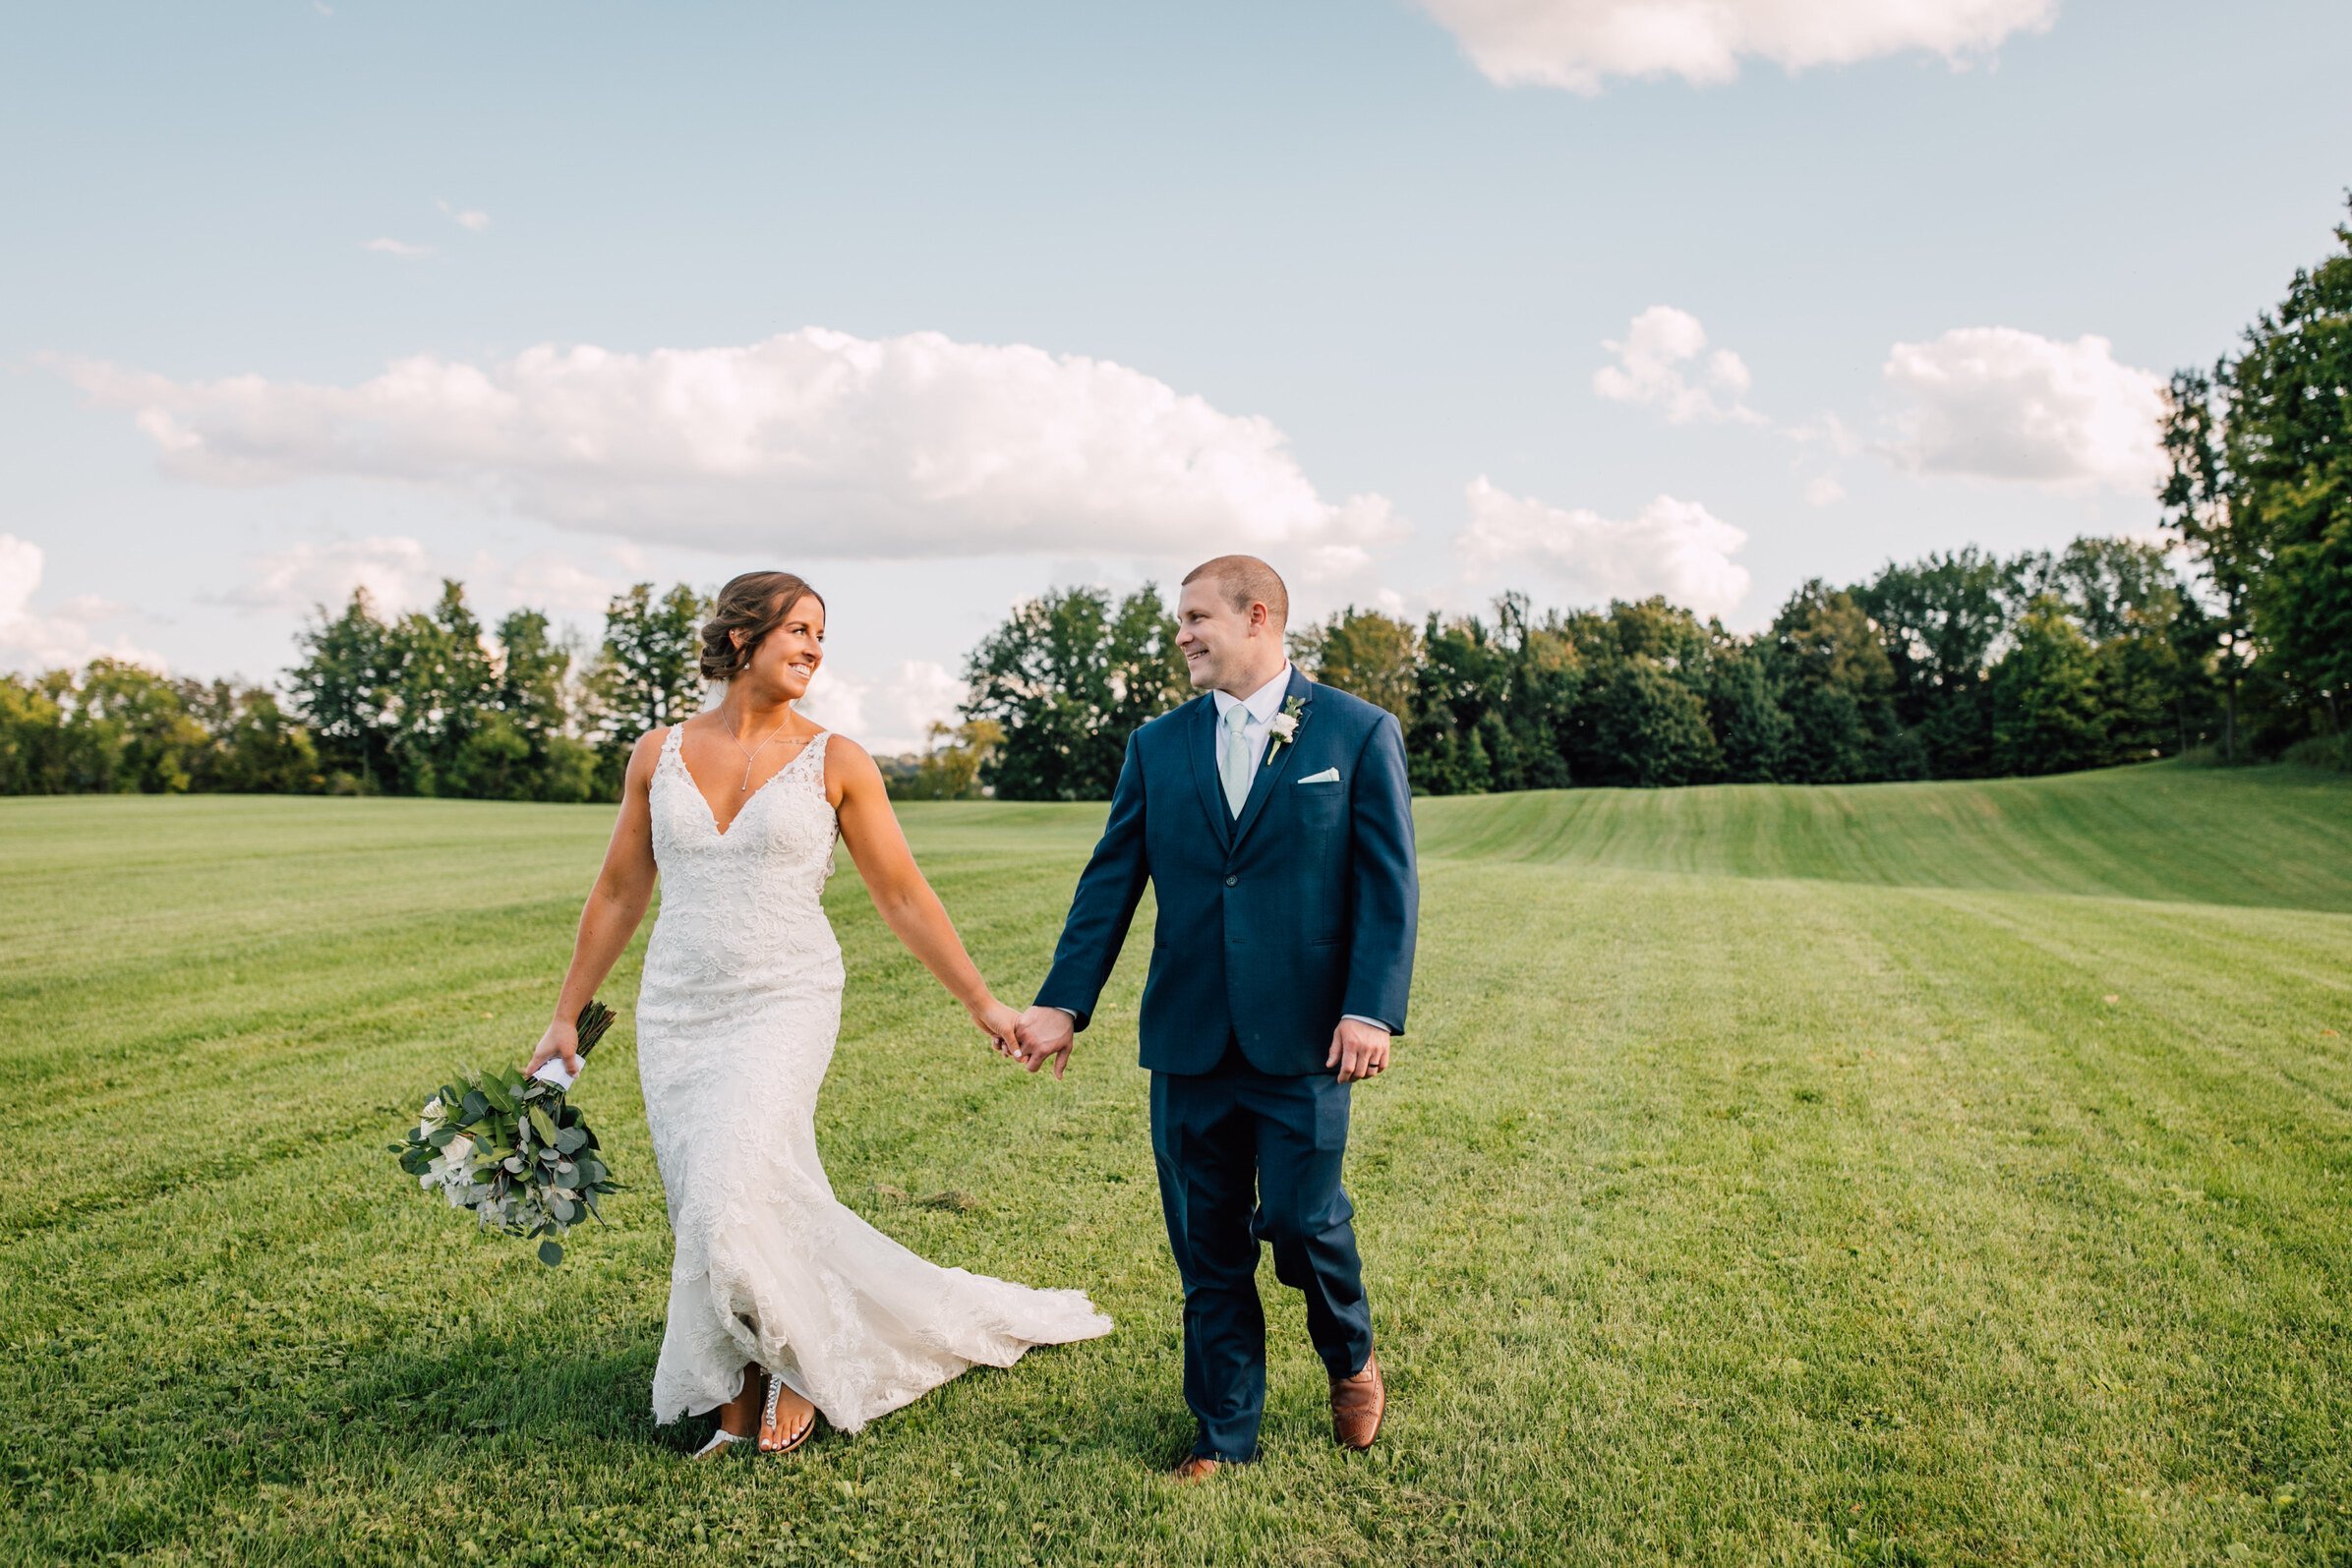  The bride and groom walk hand in hand in a field while looking at each other during their barn wedding 